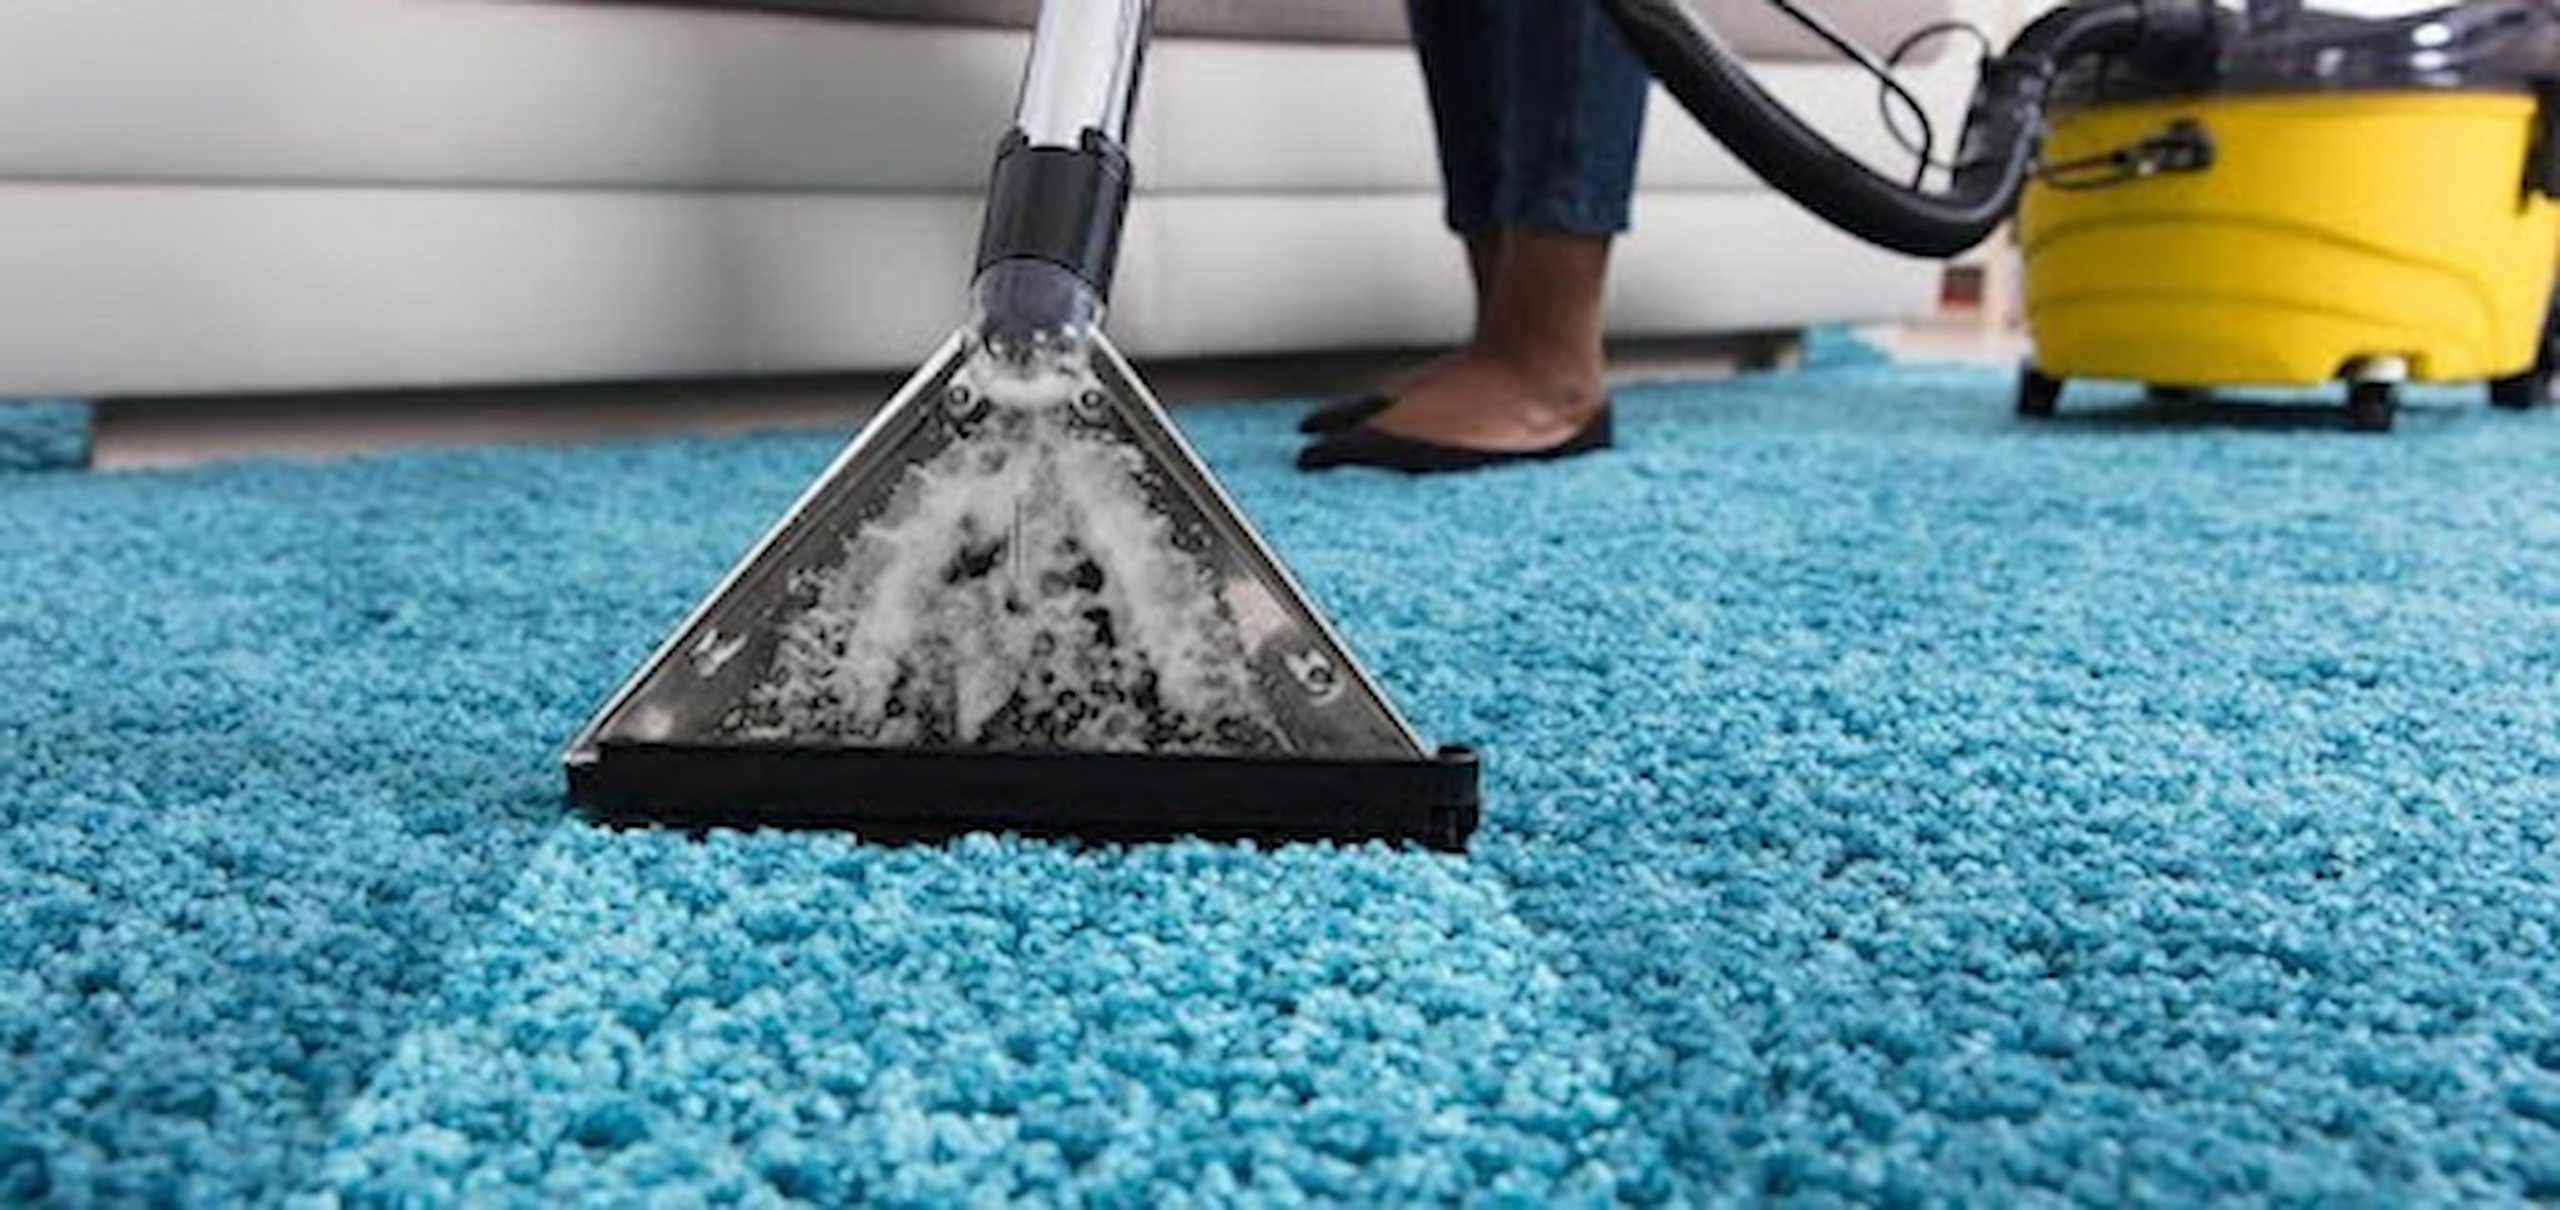 All About Commercial Carpet Cleaning Service In San Diego